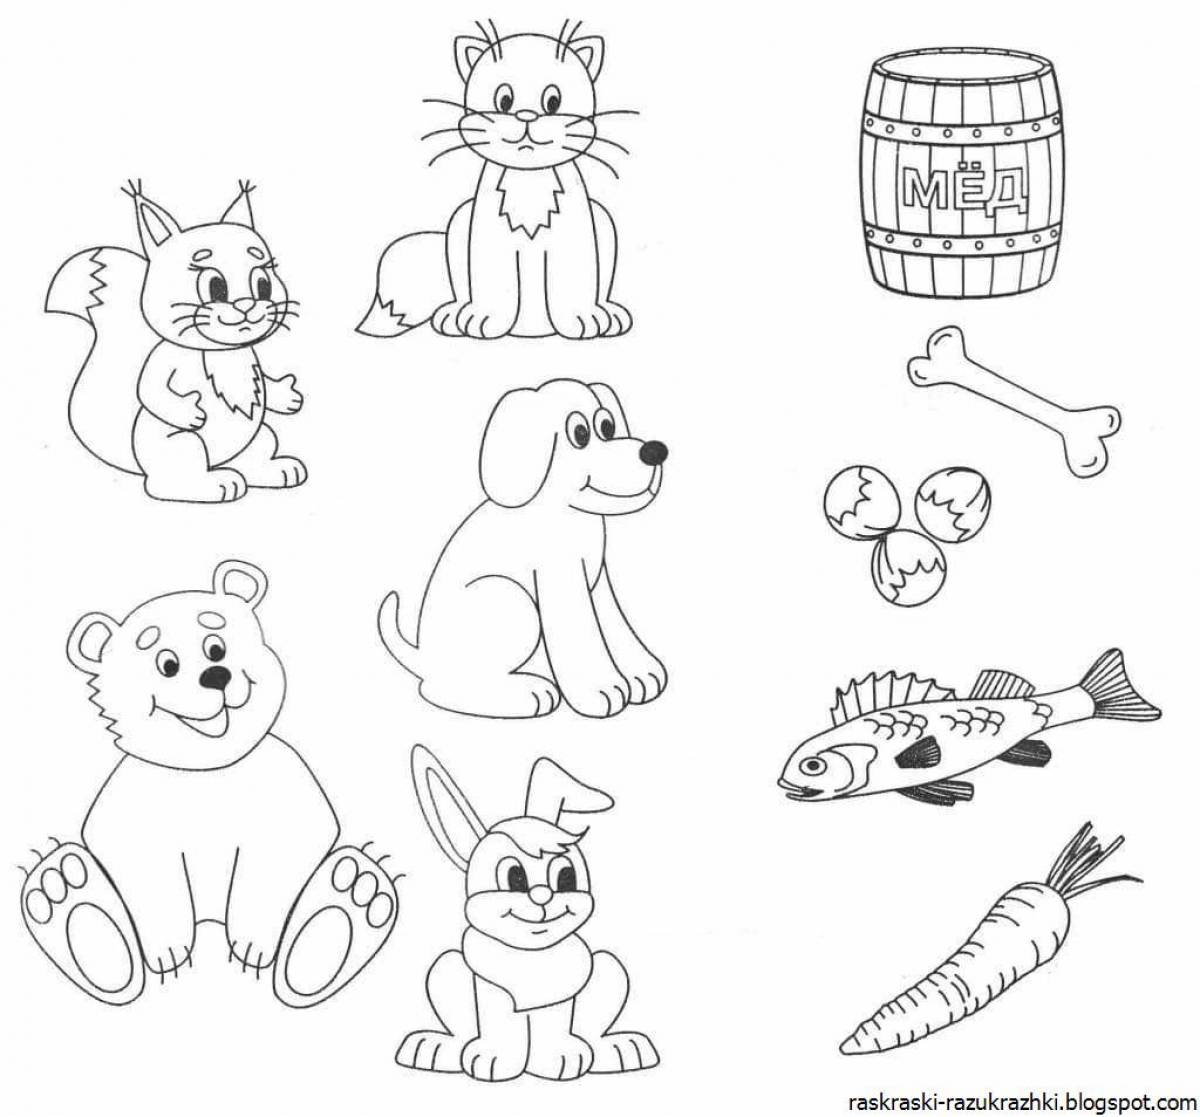 A fun coloring book for students